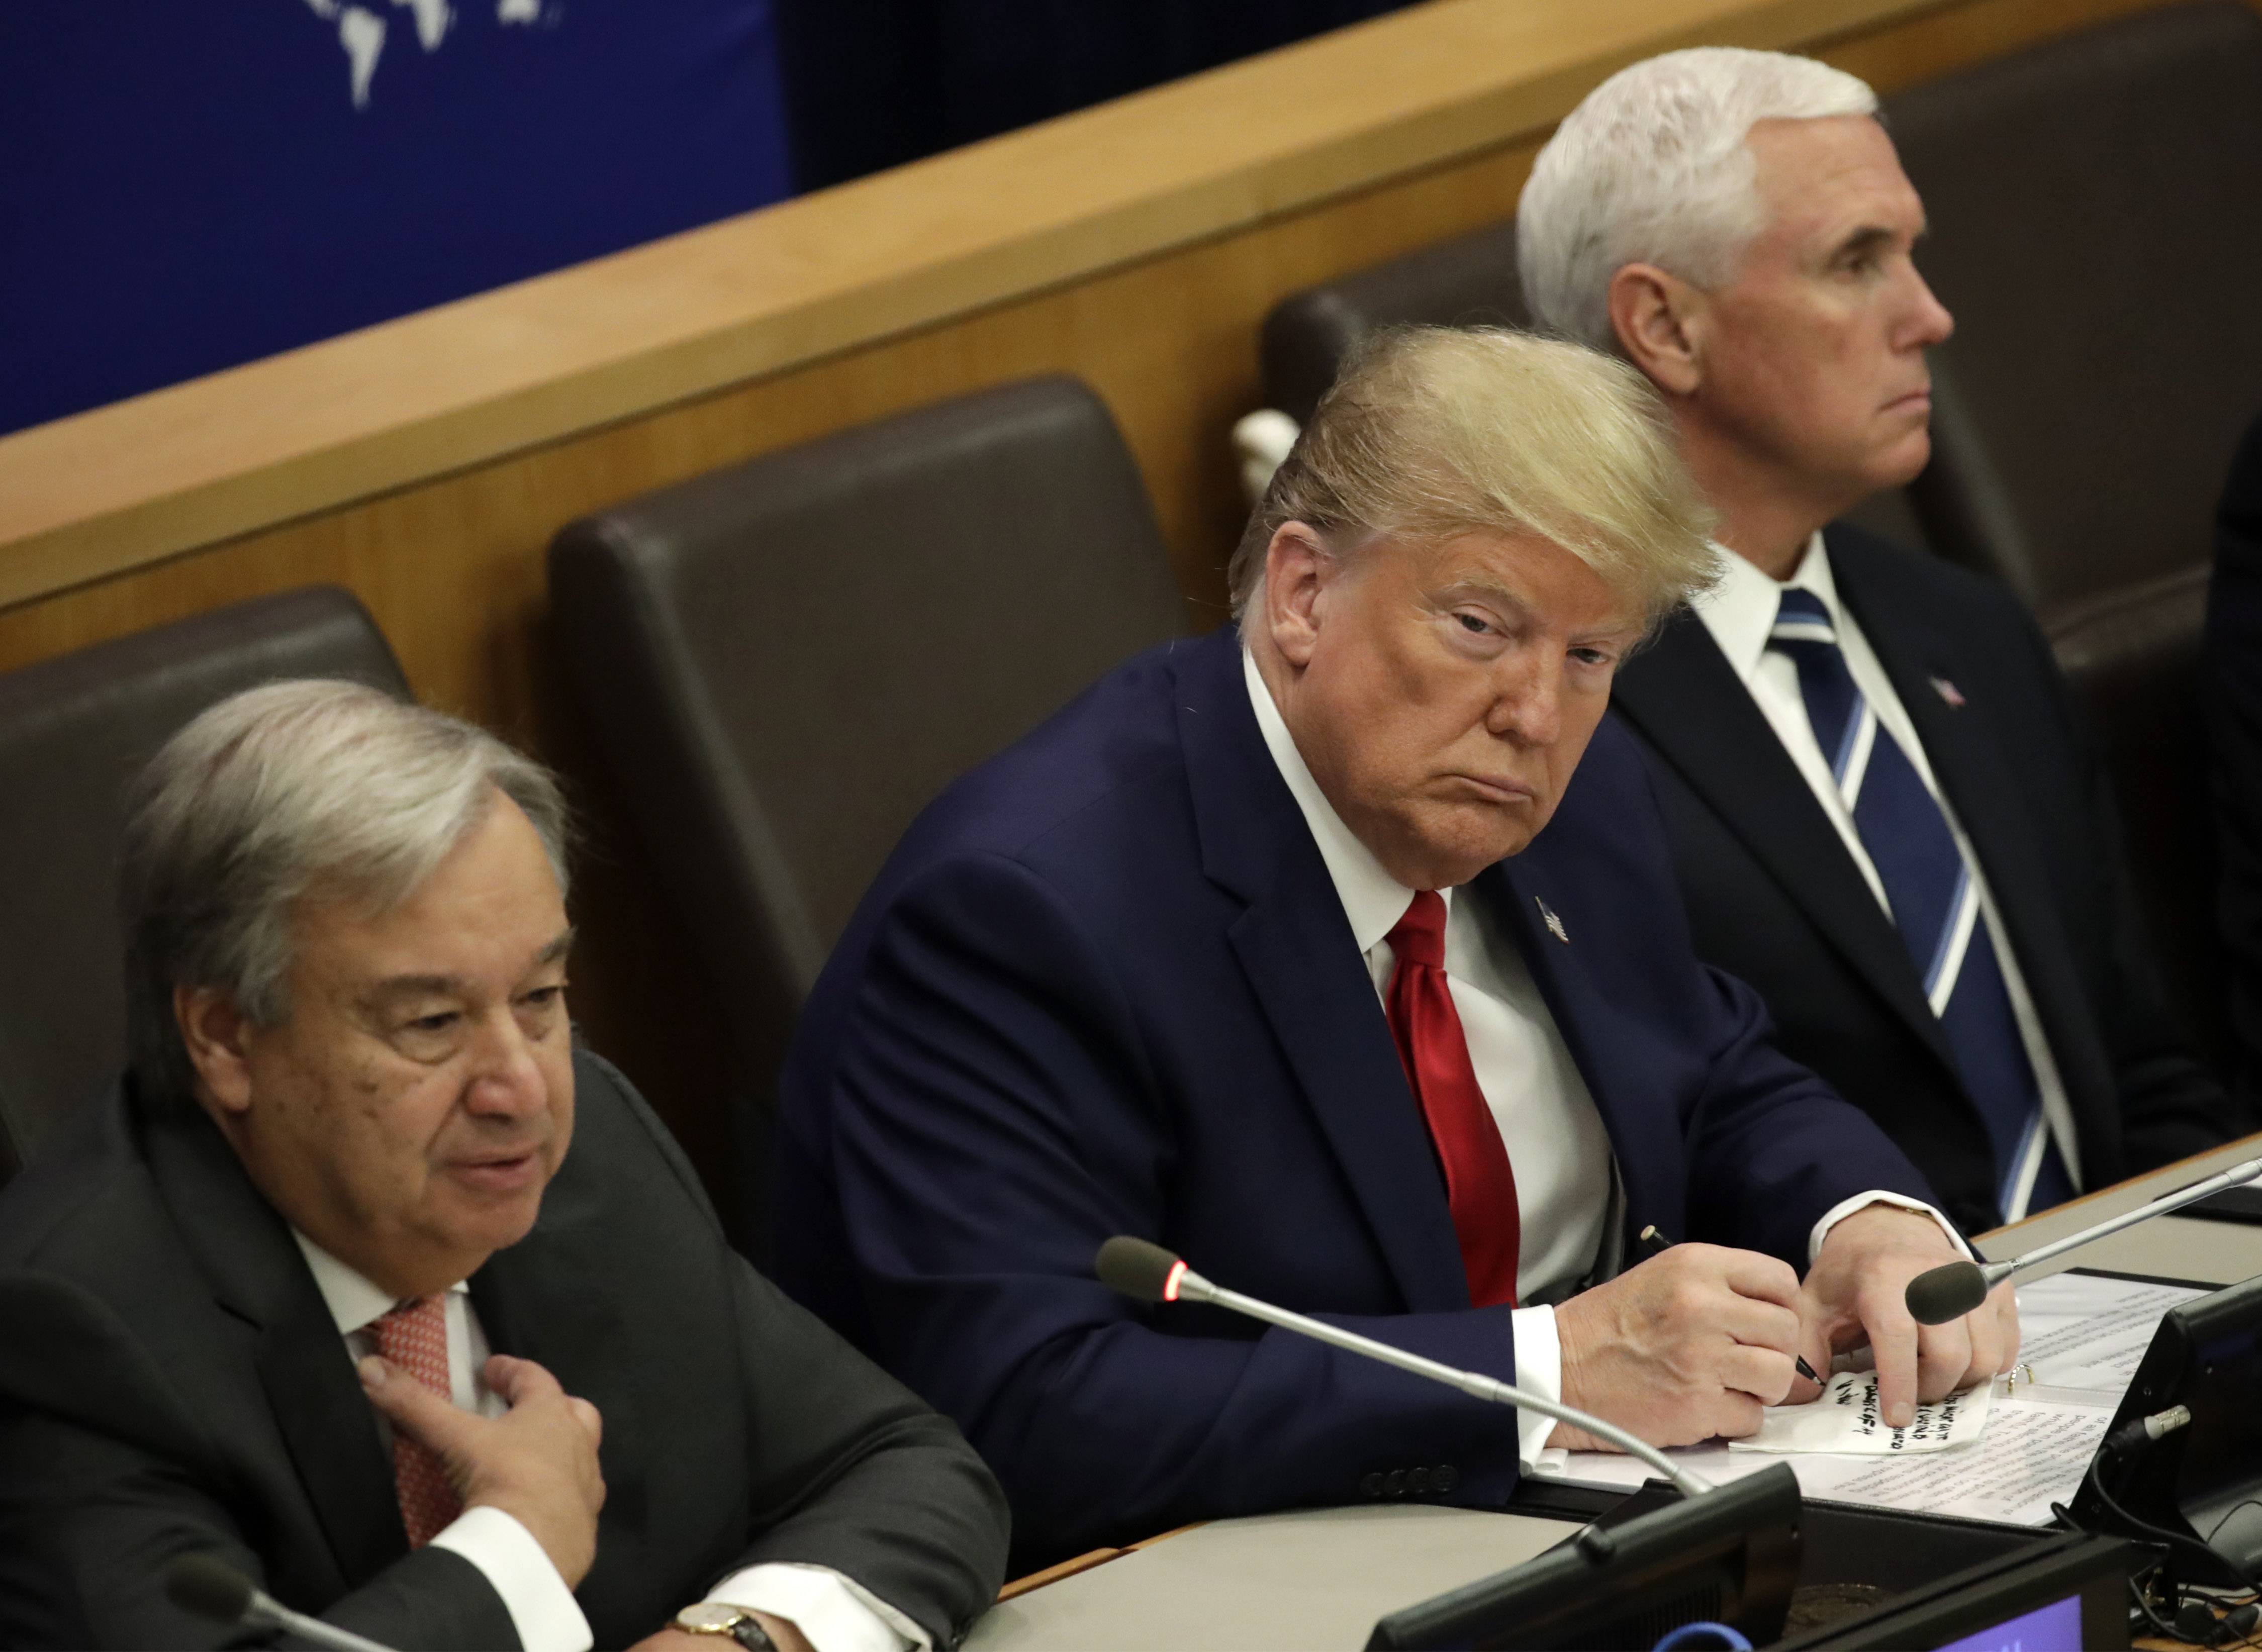 epa07864538 US President Donald J. Trump (C) is seen writing on a piece of paper while listening to United Nations Secretary General Antonio Guterres' (L) remarks at the United Nations for a global call to protect religious freedom with US Vice President Mike Pence (R) ahead of the General Debate of the General Assembly of the United Nations at United Nations Headquarters in New York, New York, USA, 23 September 2019. The General Debate of the 74th session of the UN General Assembly begins on 24 September.  EPA/JASON SZENES